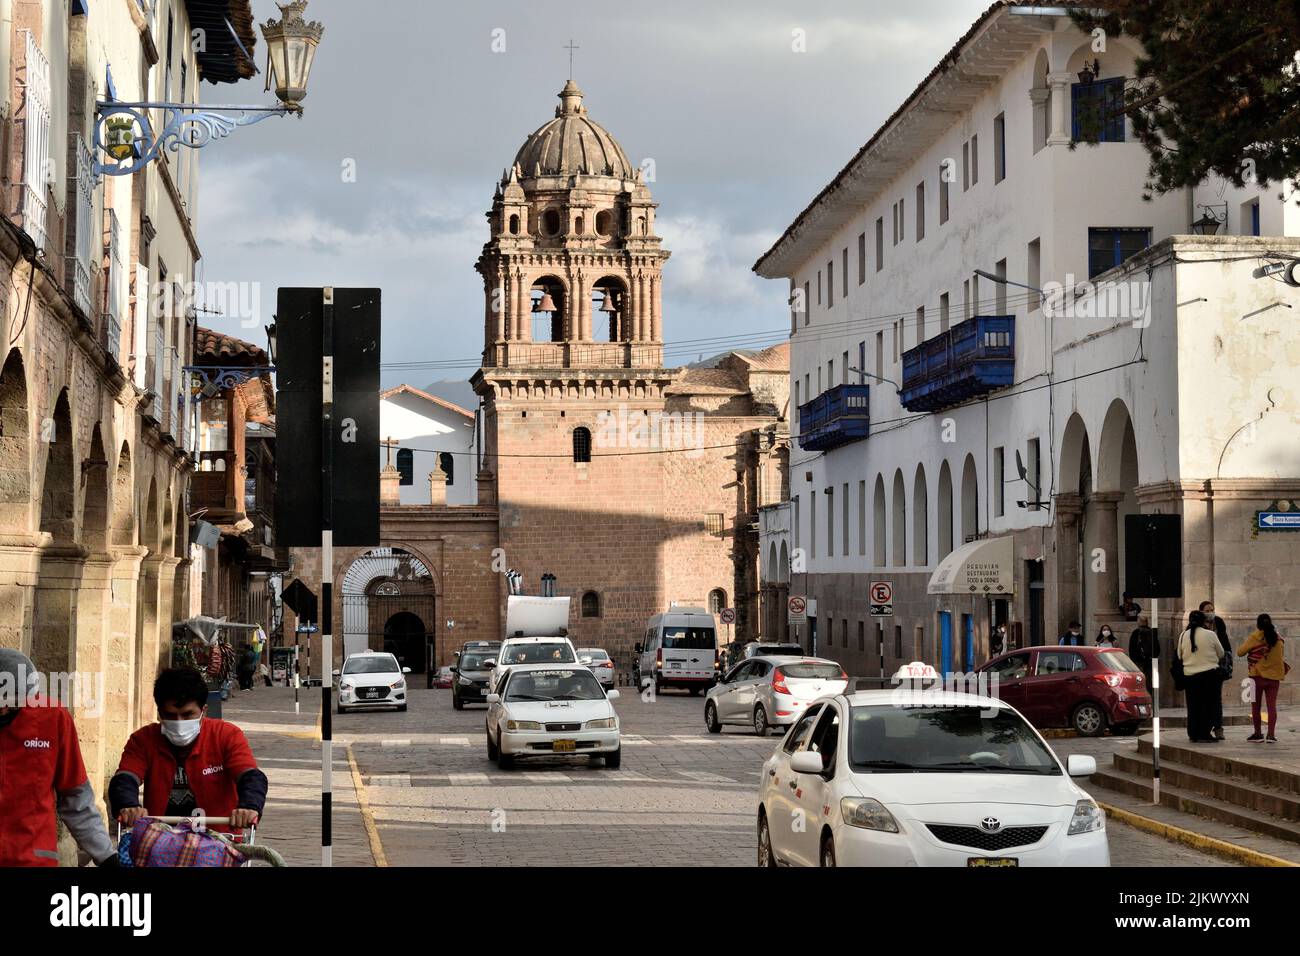 A view of the Convent of La Merced and the bell tower in the City of Cusco, Peru Stock Photo